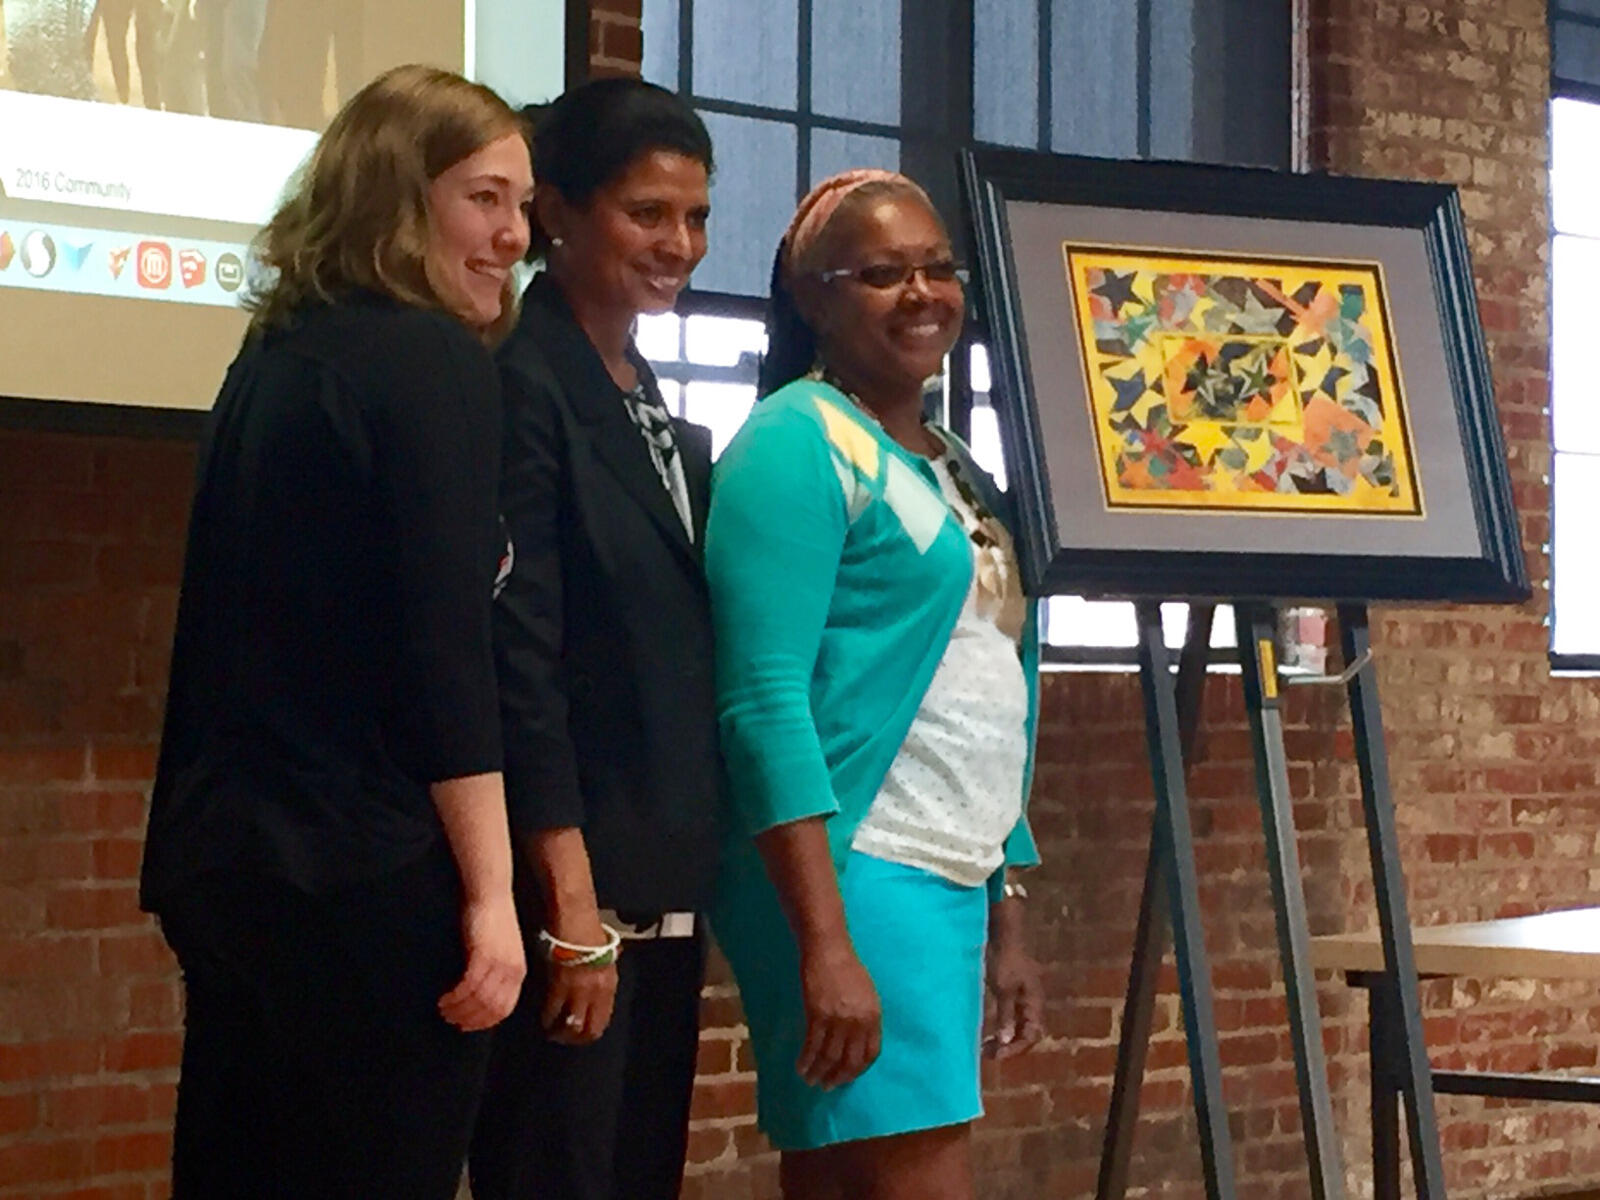 Wellness Engagement Petersburg received the “Currents of Change” award for overall excellence. Rachel Beck-Berman, Maghboeba Mosavel, Ph.D., and Juanita Epps, Ph.D., received a framed limited-edition print of a watercolor by W. Baxter Perkinson, D.D.S.